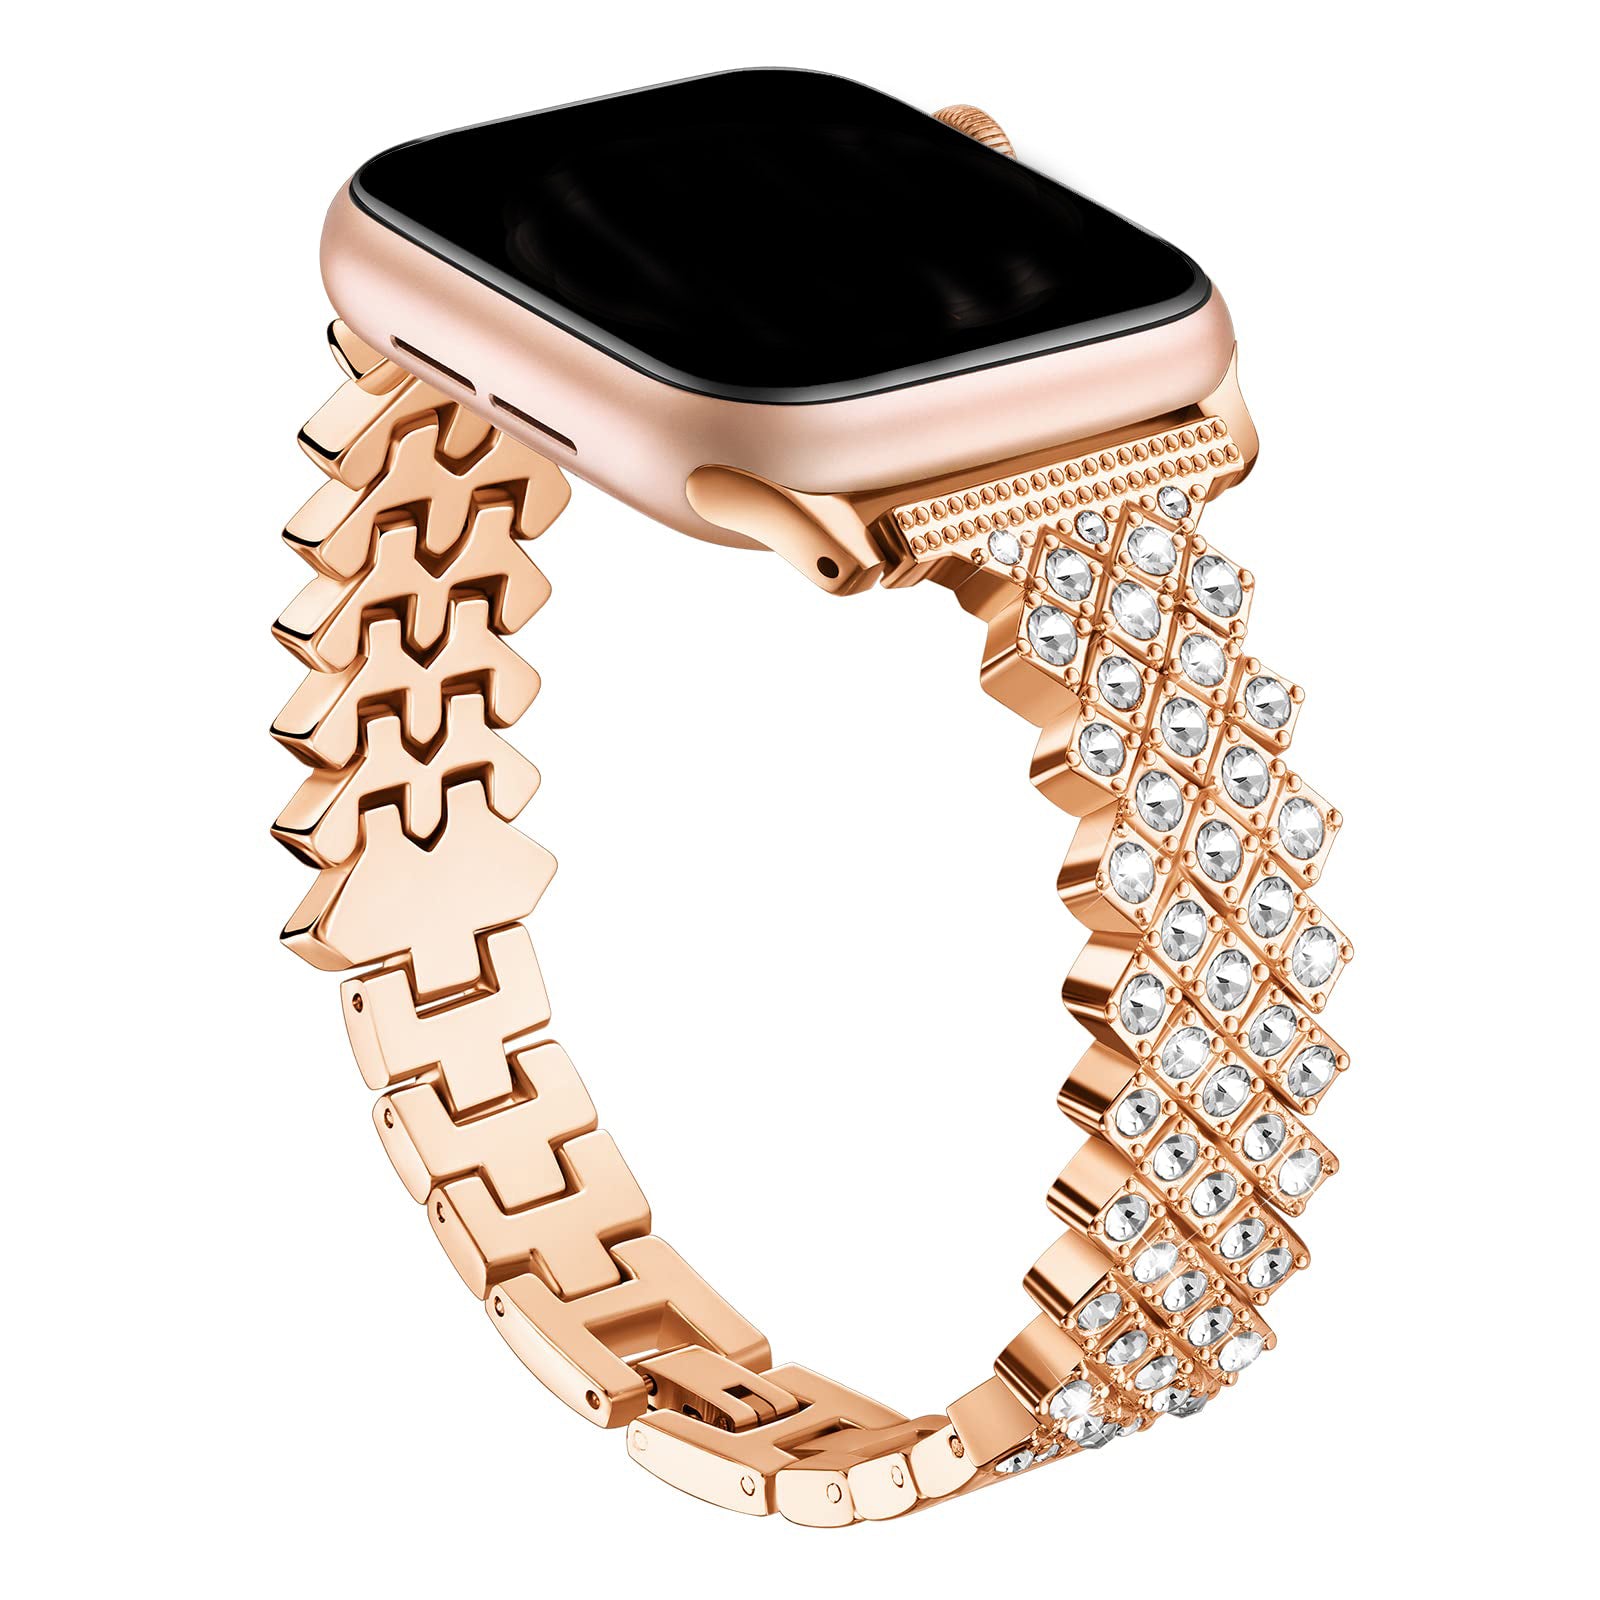 Luxury Rhombus Style Bracelet with Rhinestones Apple Watch Bands for All Series